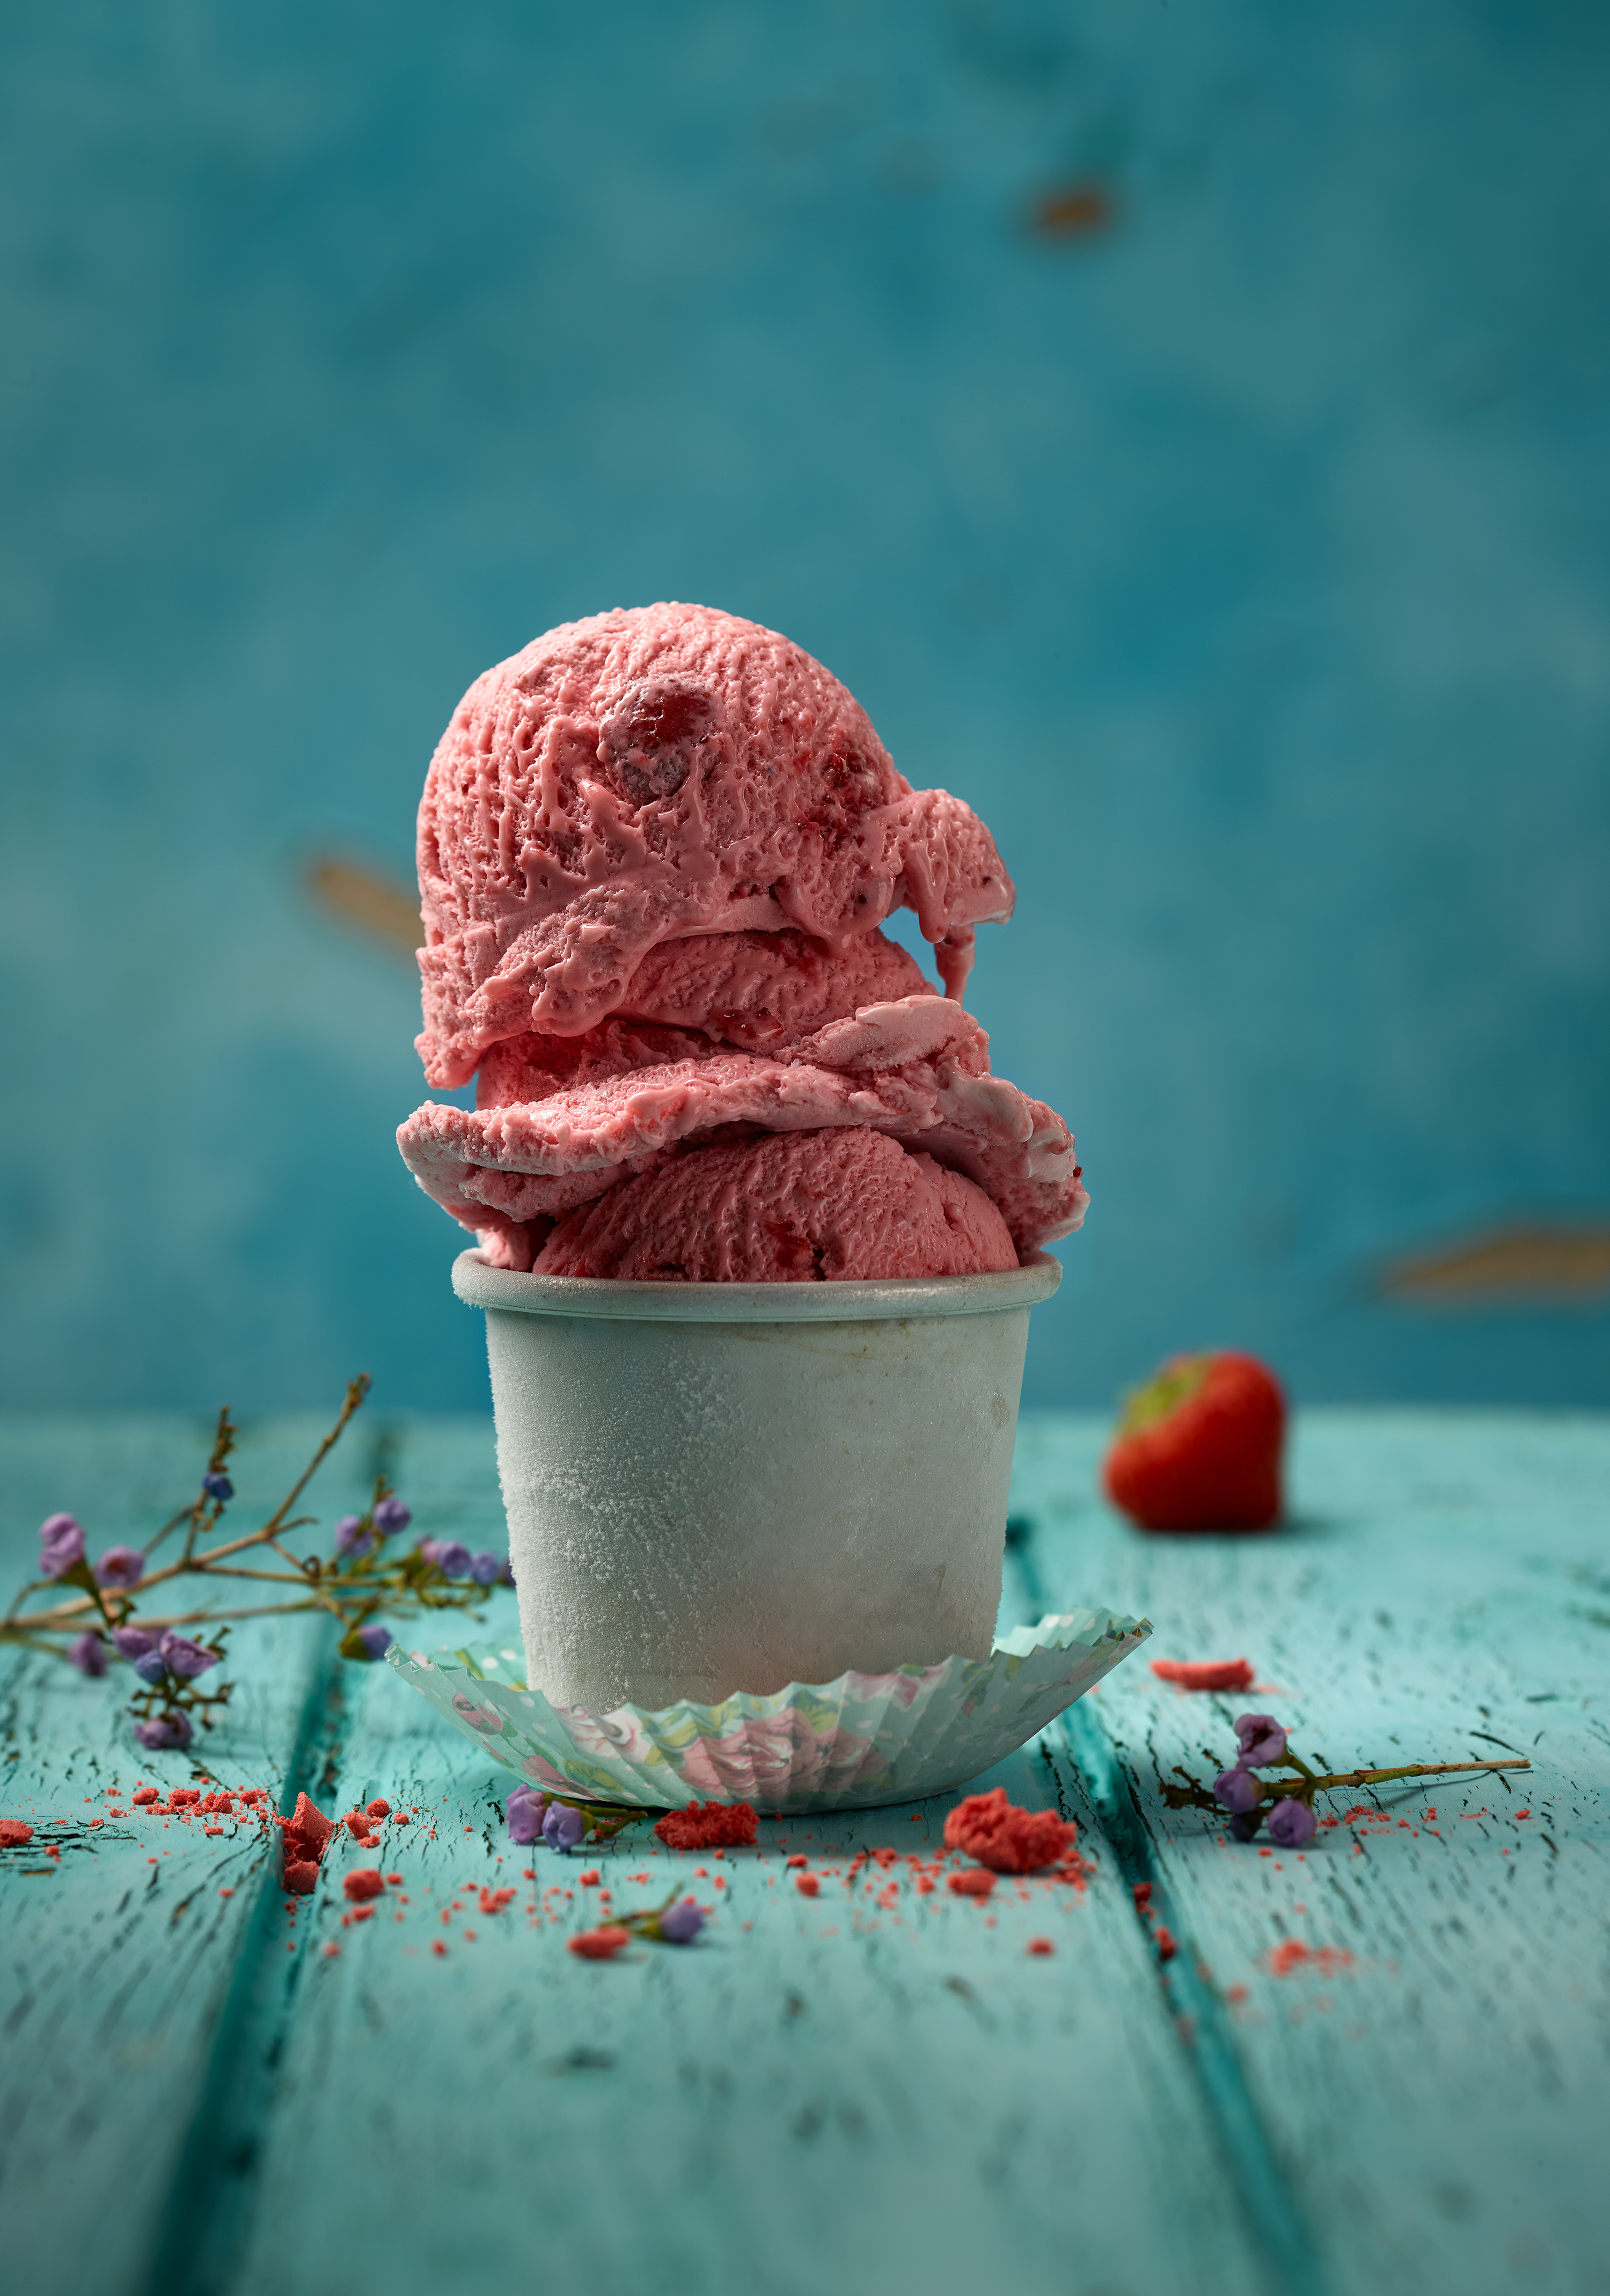 Three scoops of strawberry ice cream are in an iced shell. This stands on a colored baking paper. turquoise painted wooden board as background, blue background